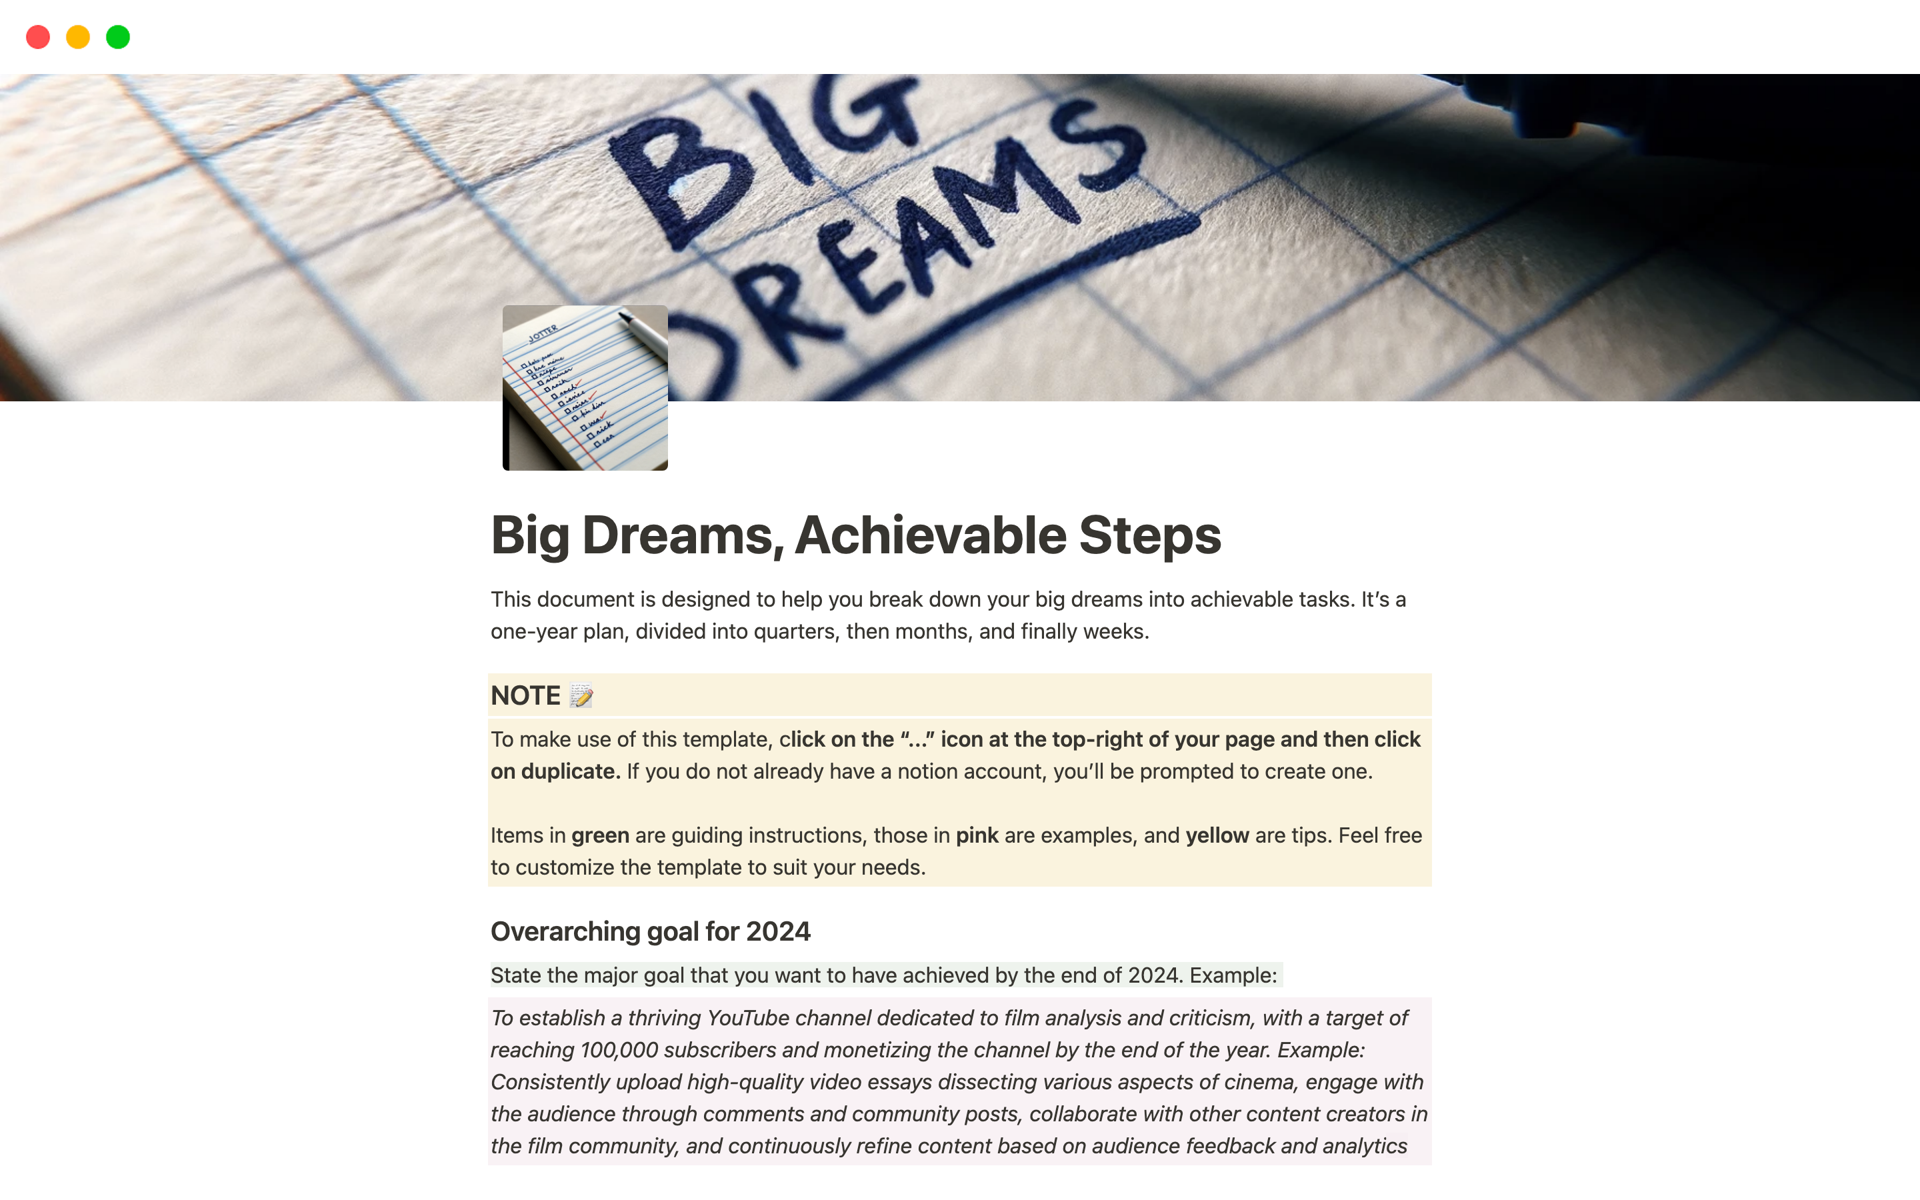 This template provides a structured framework for breaking down big dreams/goals into achievable steps, facilitating quarterly, monthly, and weekly planning and reflection.